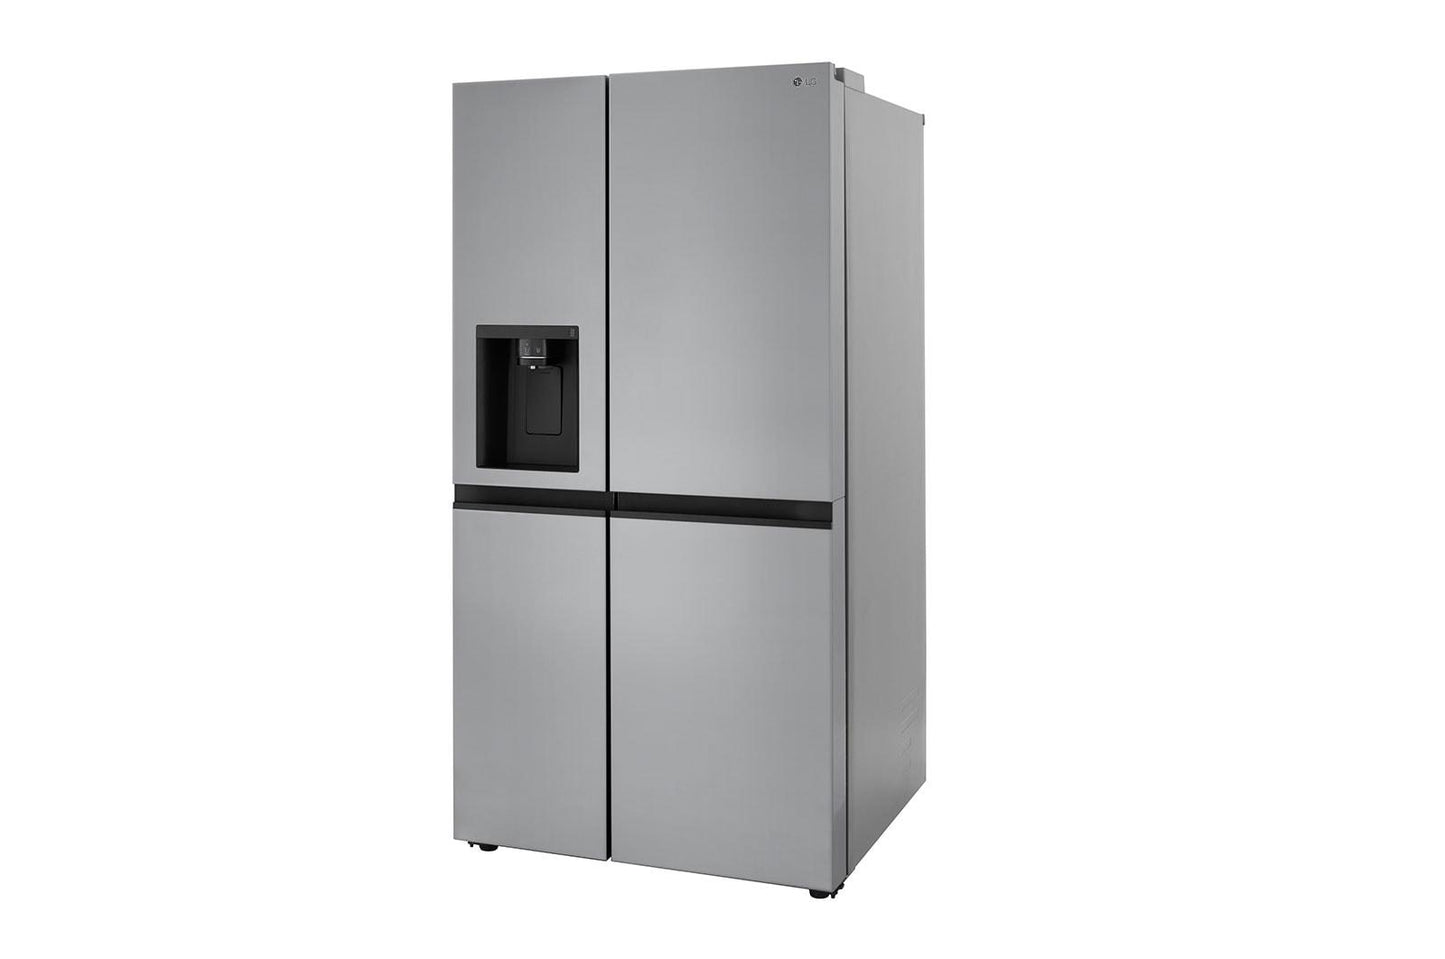 Lg LRSXC2306V 23 Cu. Ft. Side-By-Side Counter-Depth Refrigerator With Smooth Touch Dispenser